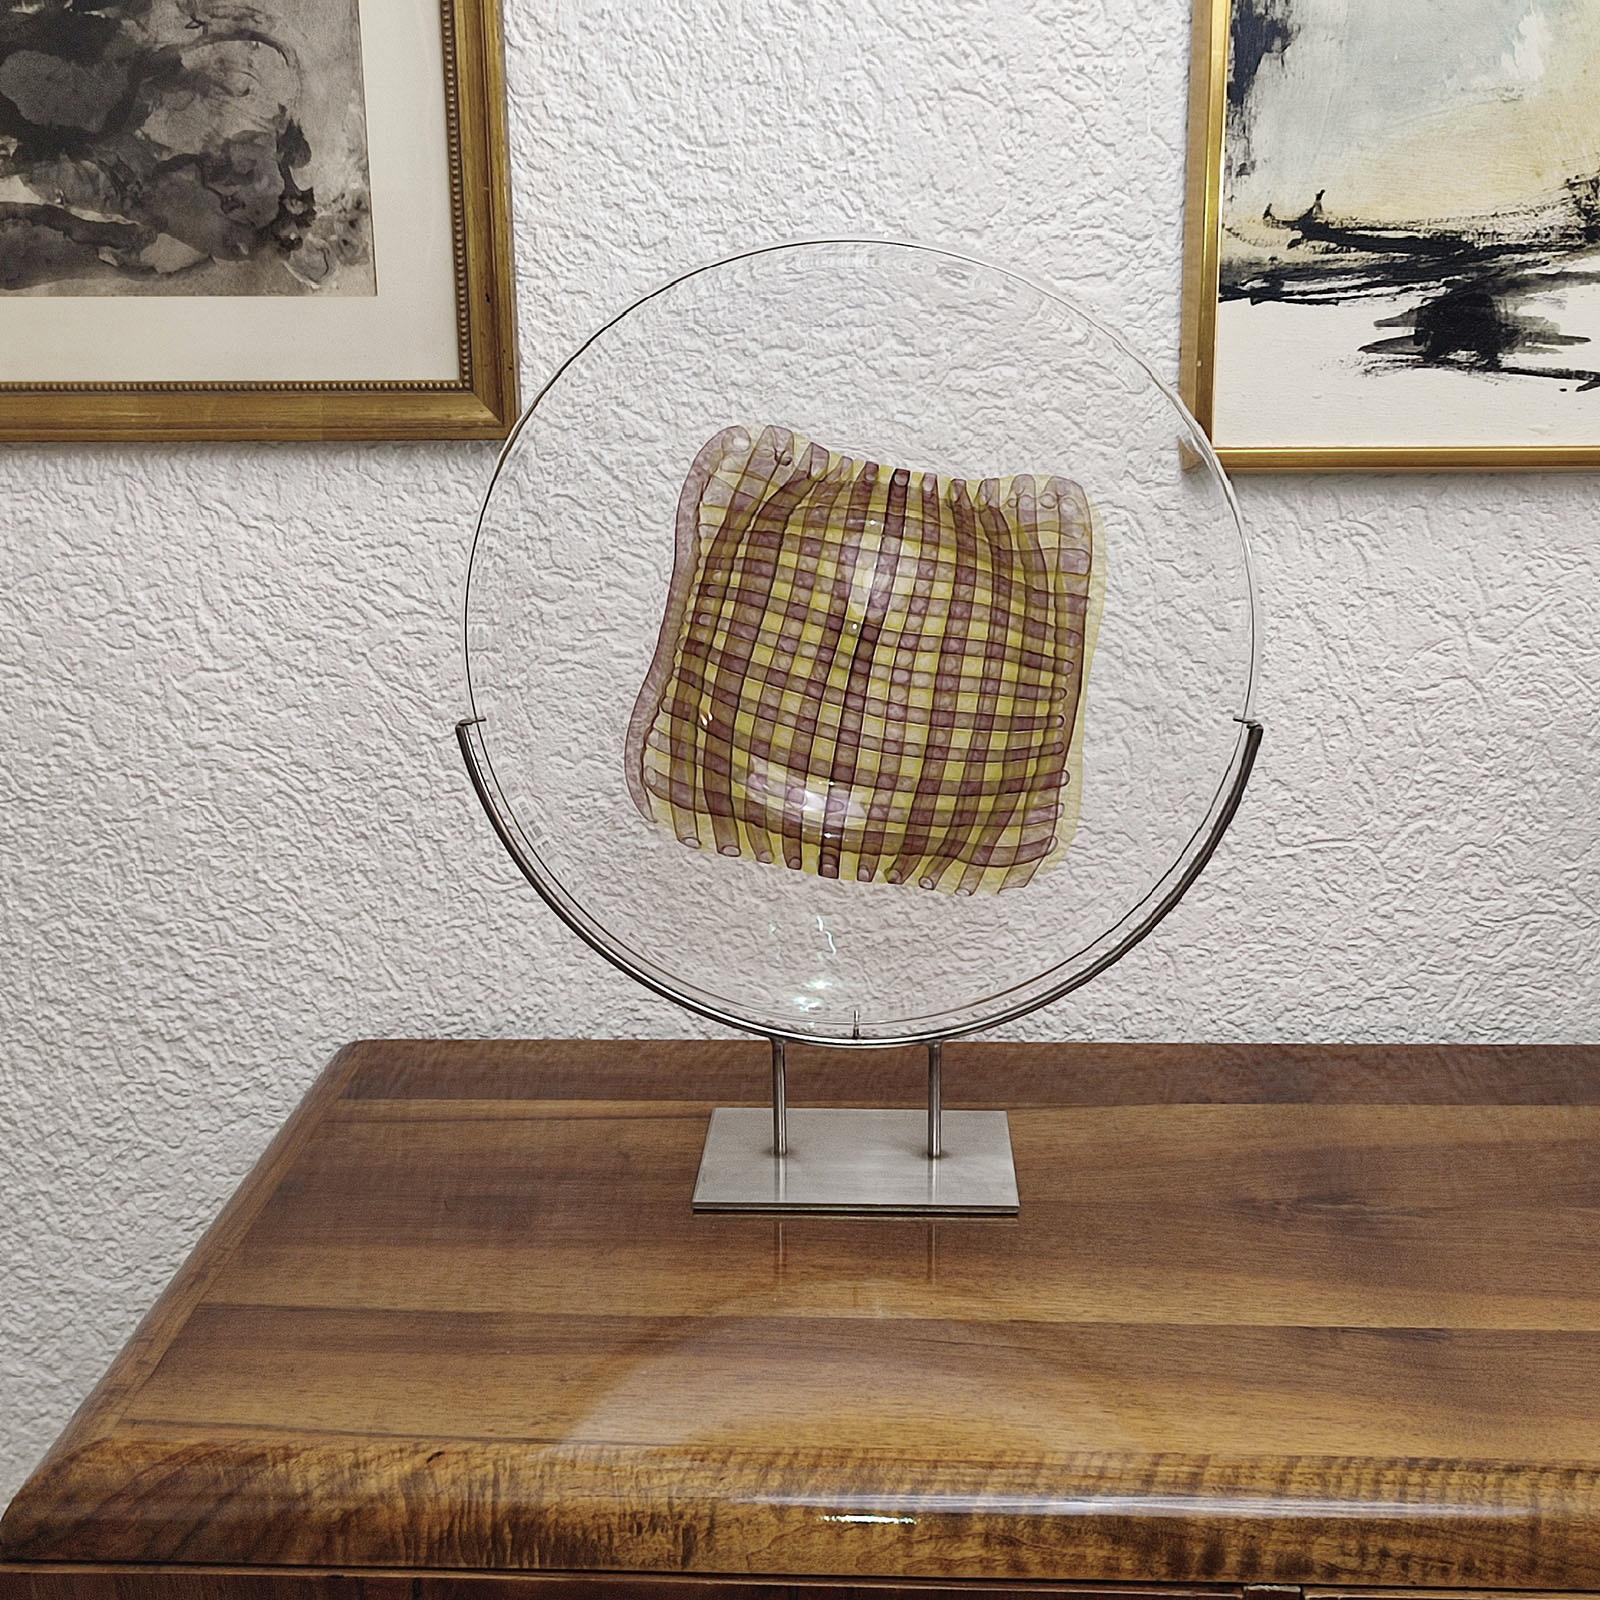 Gary Beecham Large Decorative Glass Plate 'Textile Vessel', 1982
Colorless cameo glass, with two-layer band pattern in center, like a yellow and brown checkered cloth. Brushed stainless steel holder.
Signed and dated under the bottom